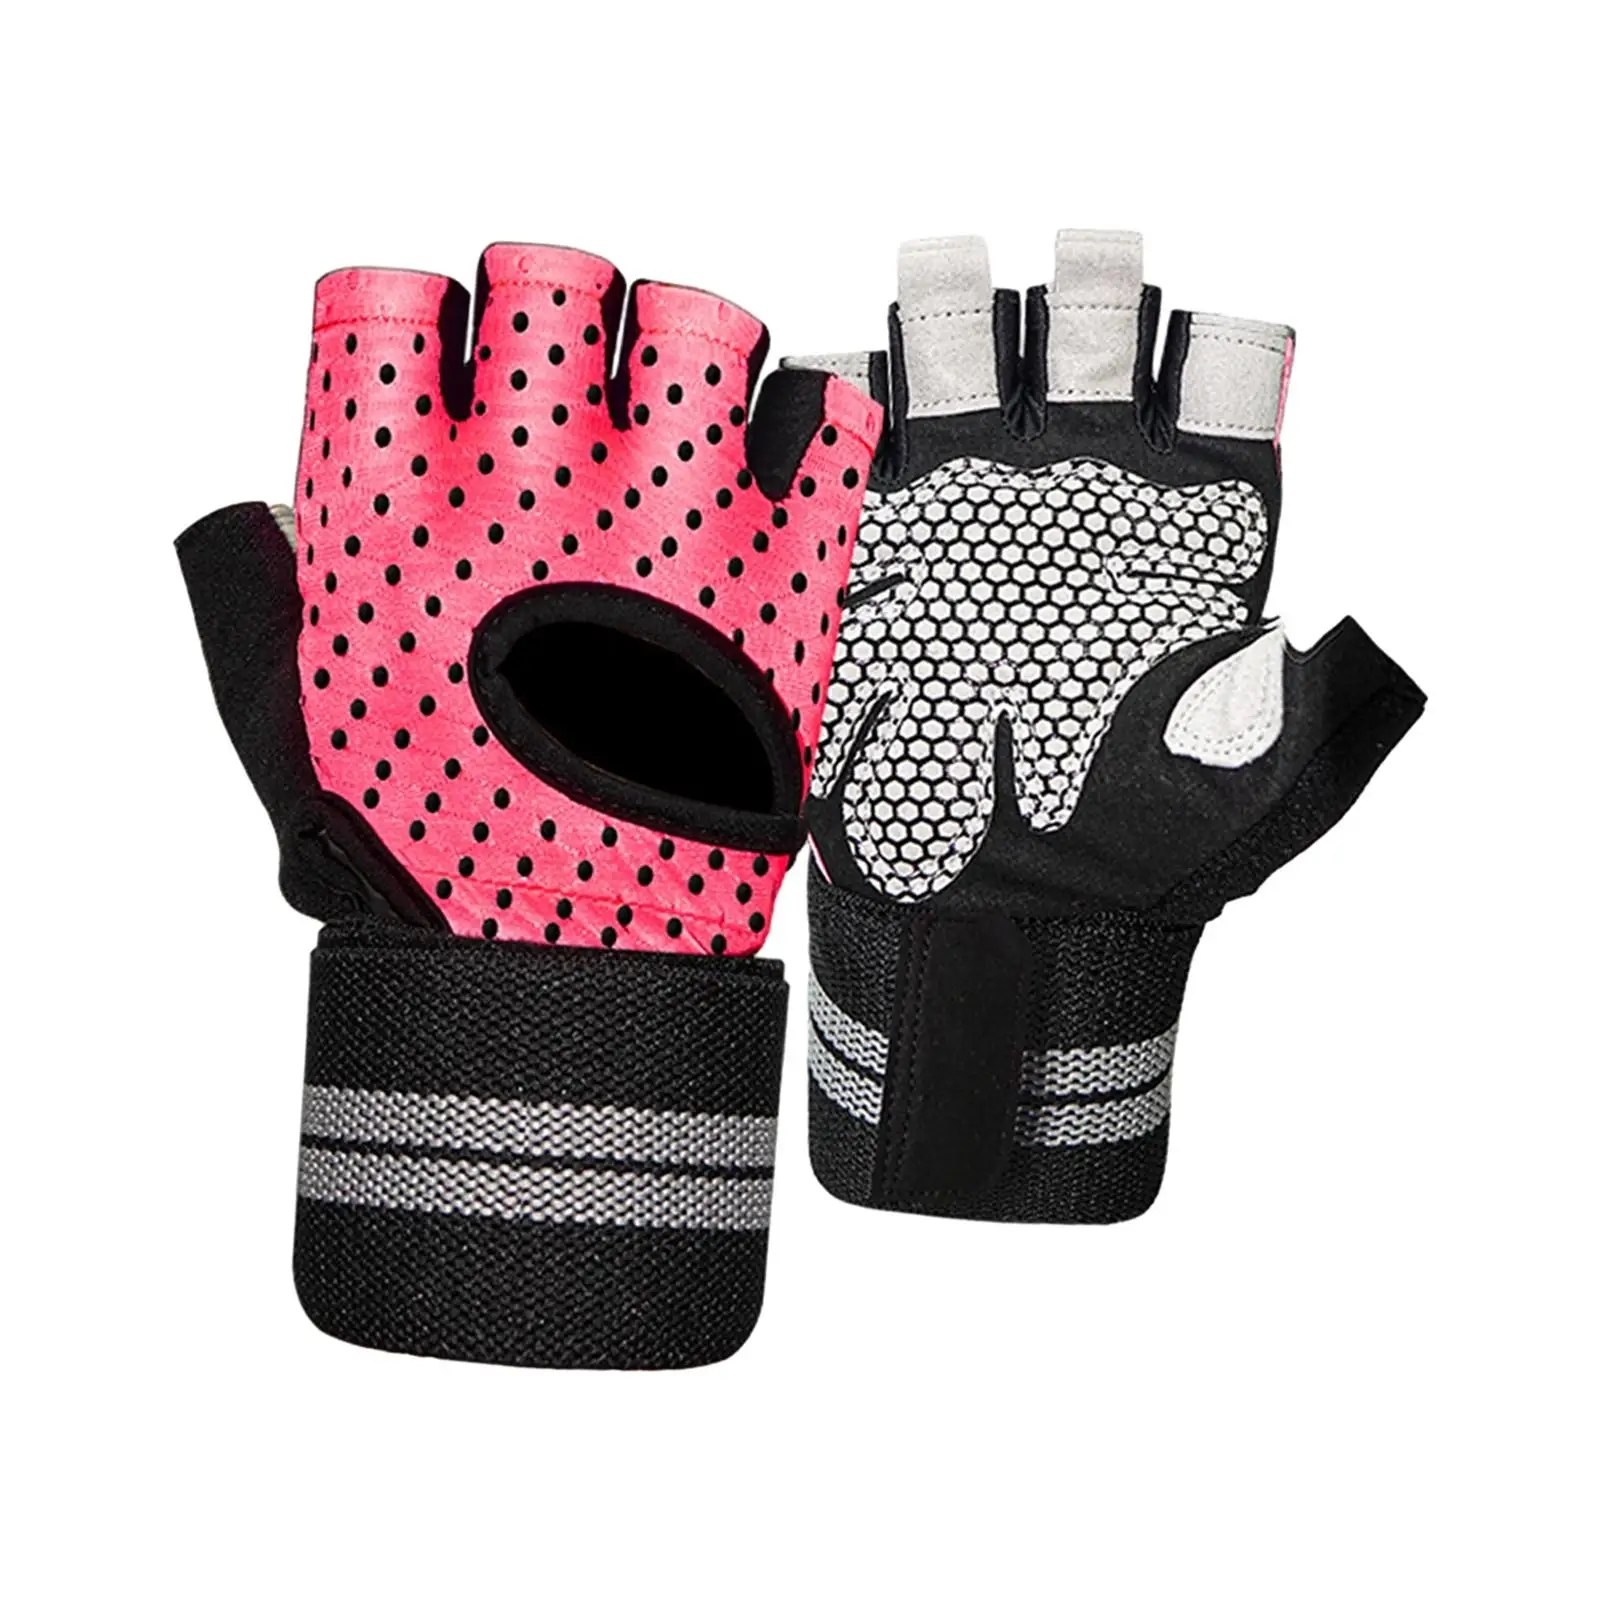 Half Finger Sports Gloves Fingerless Mittens Weight Lifting Workout Gloves for Body Building Climbing Workout Dumbbell Exercise